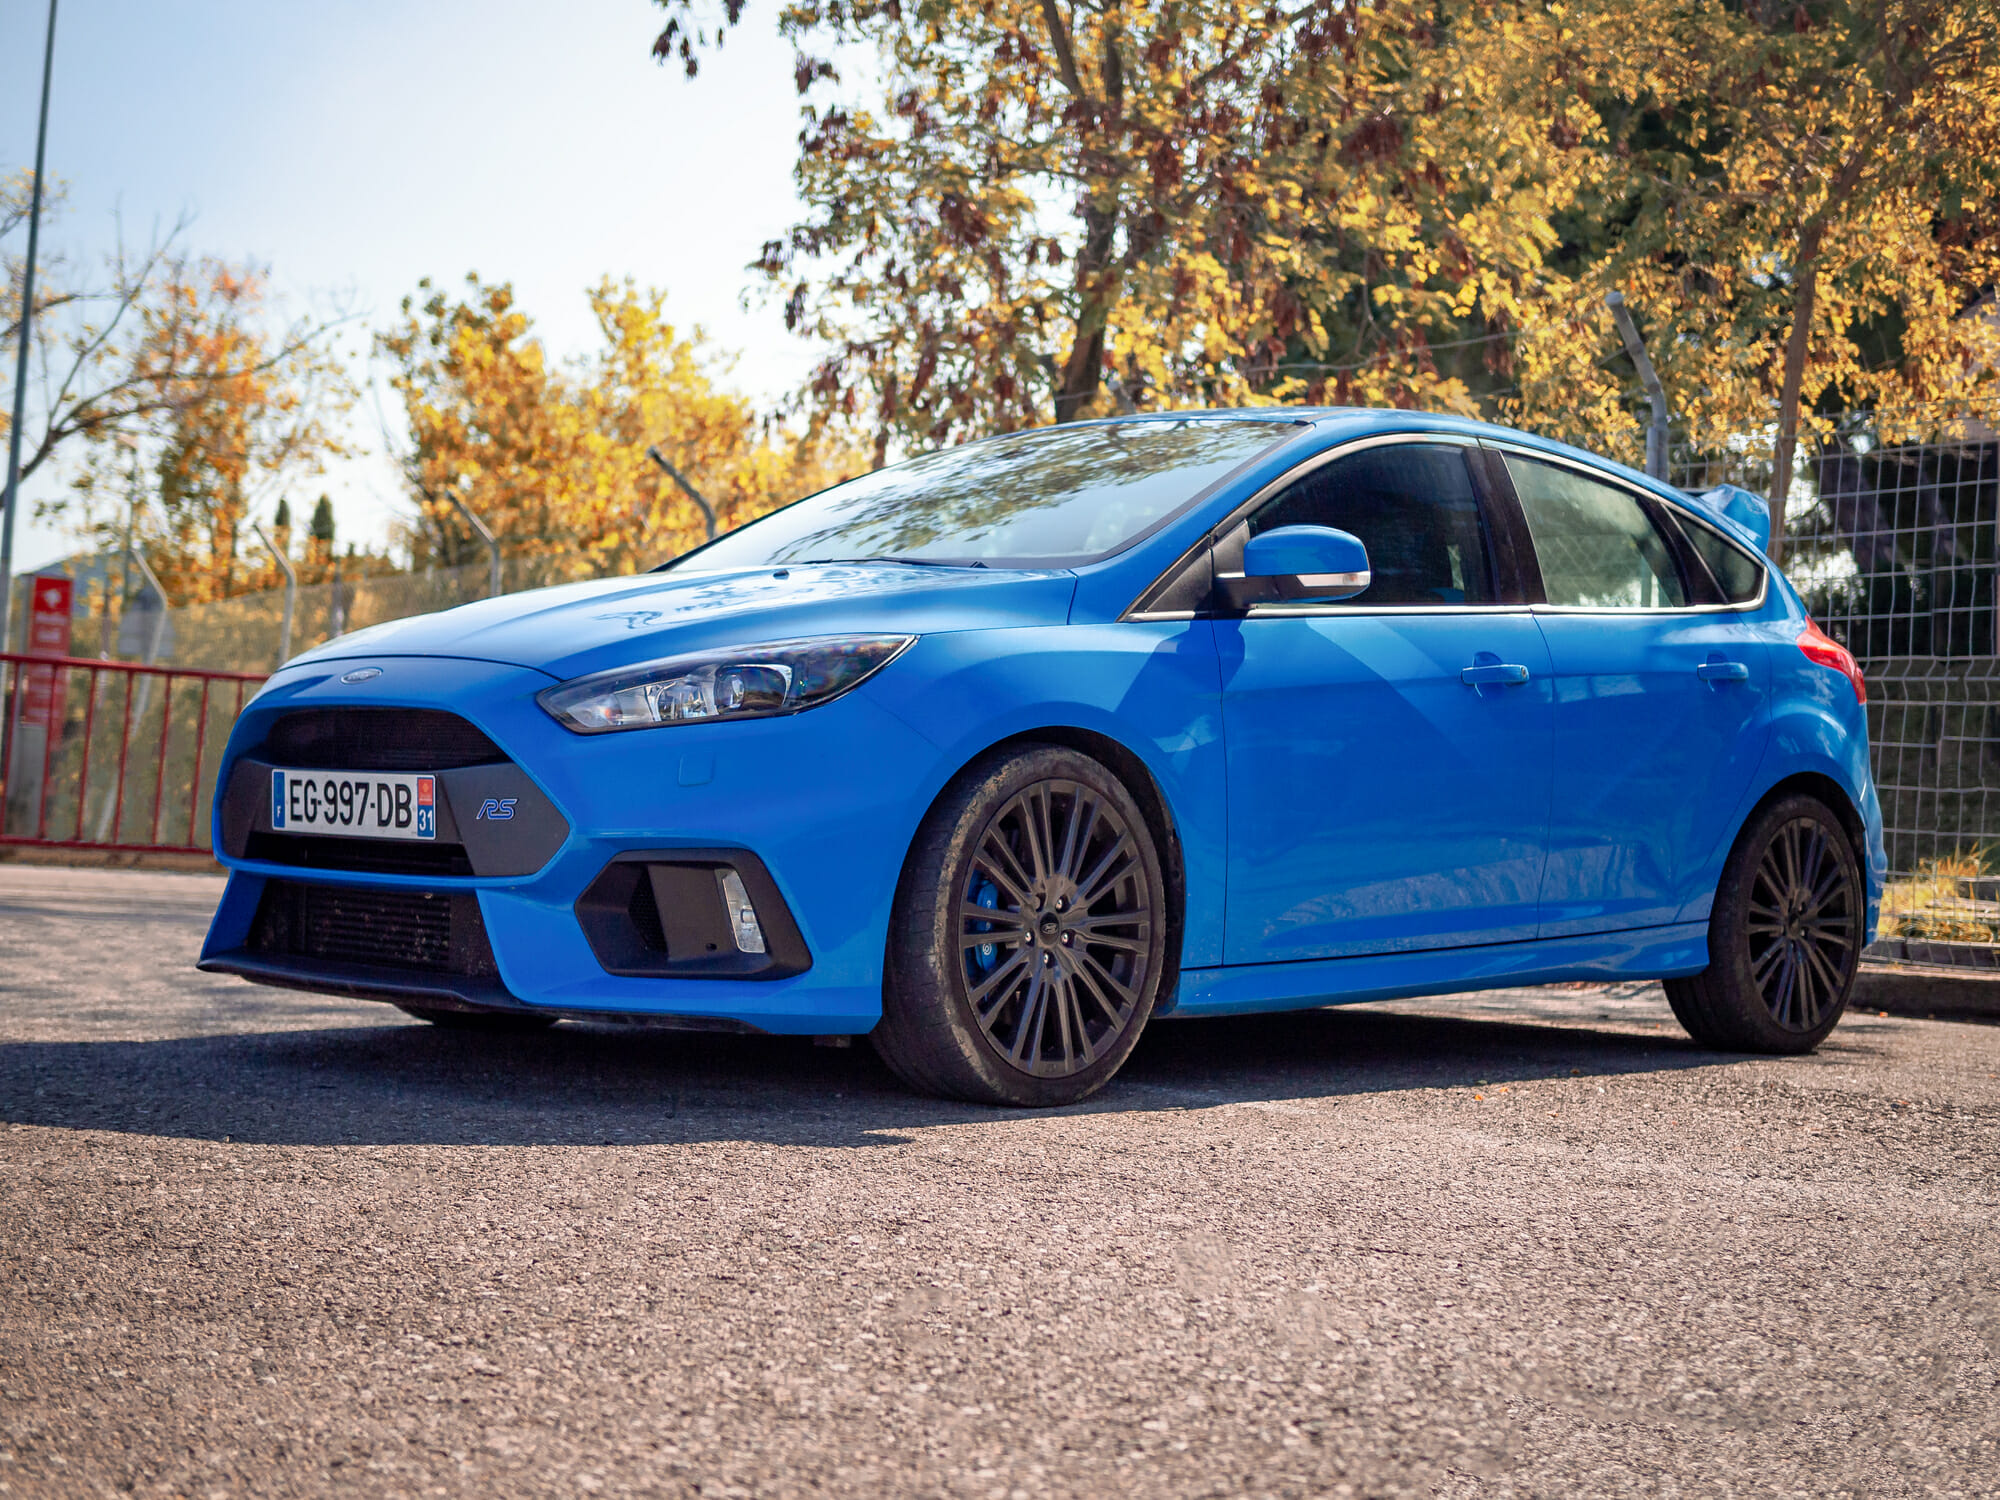 Blue Focus RS, powered by 2.3L EcoBoost - Vehicle History